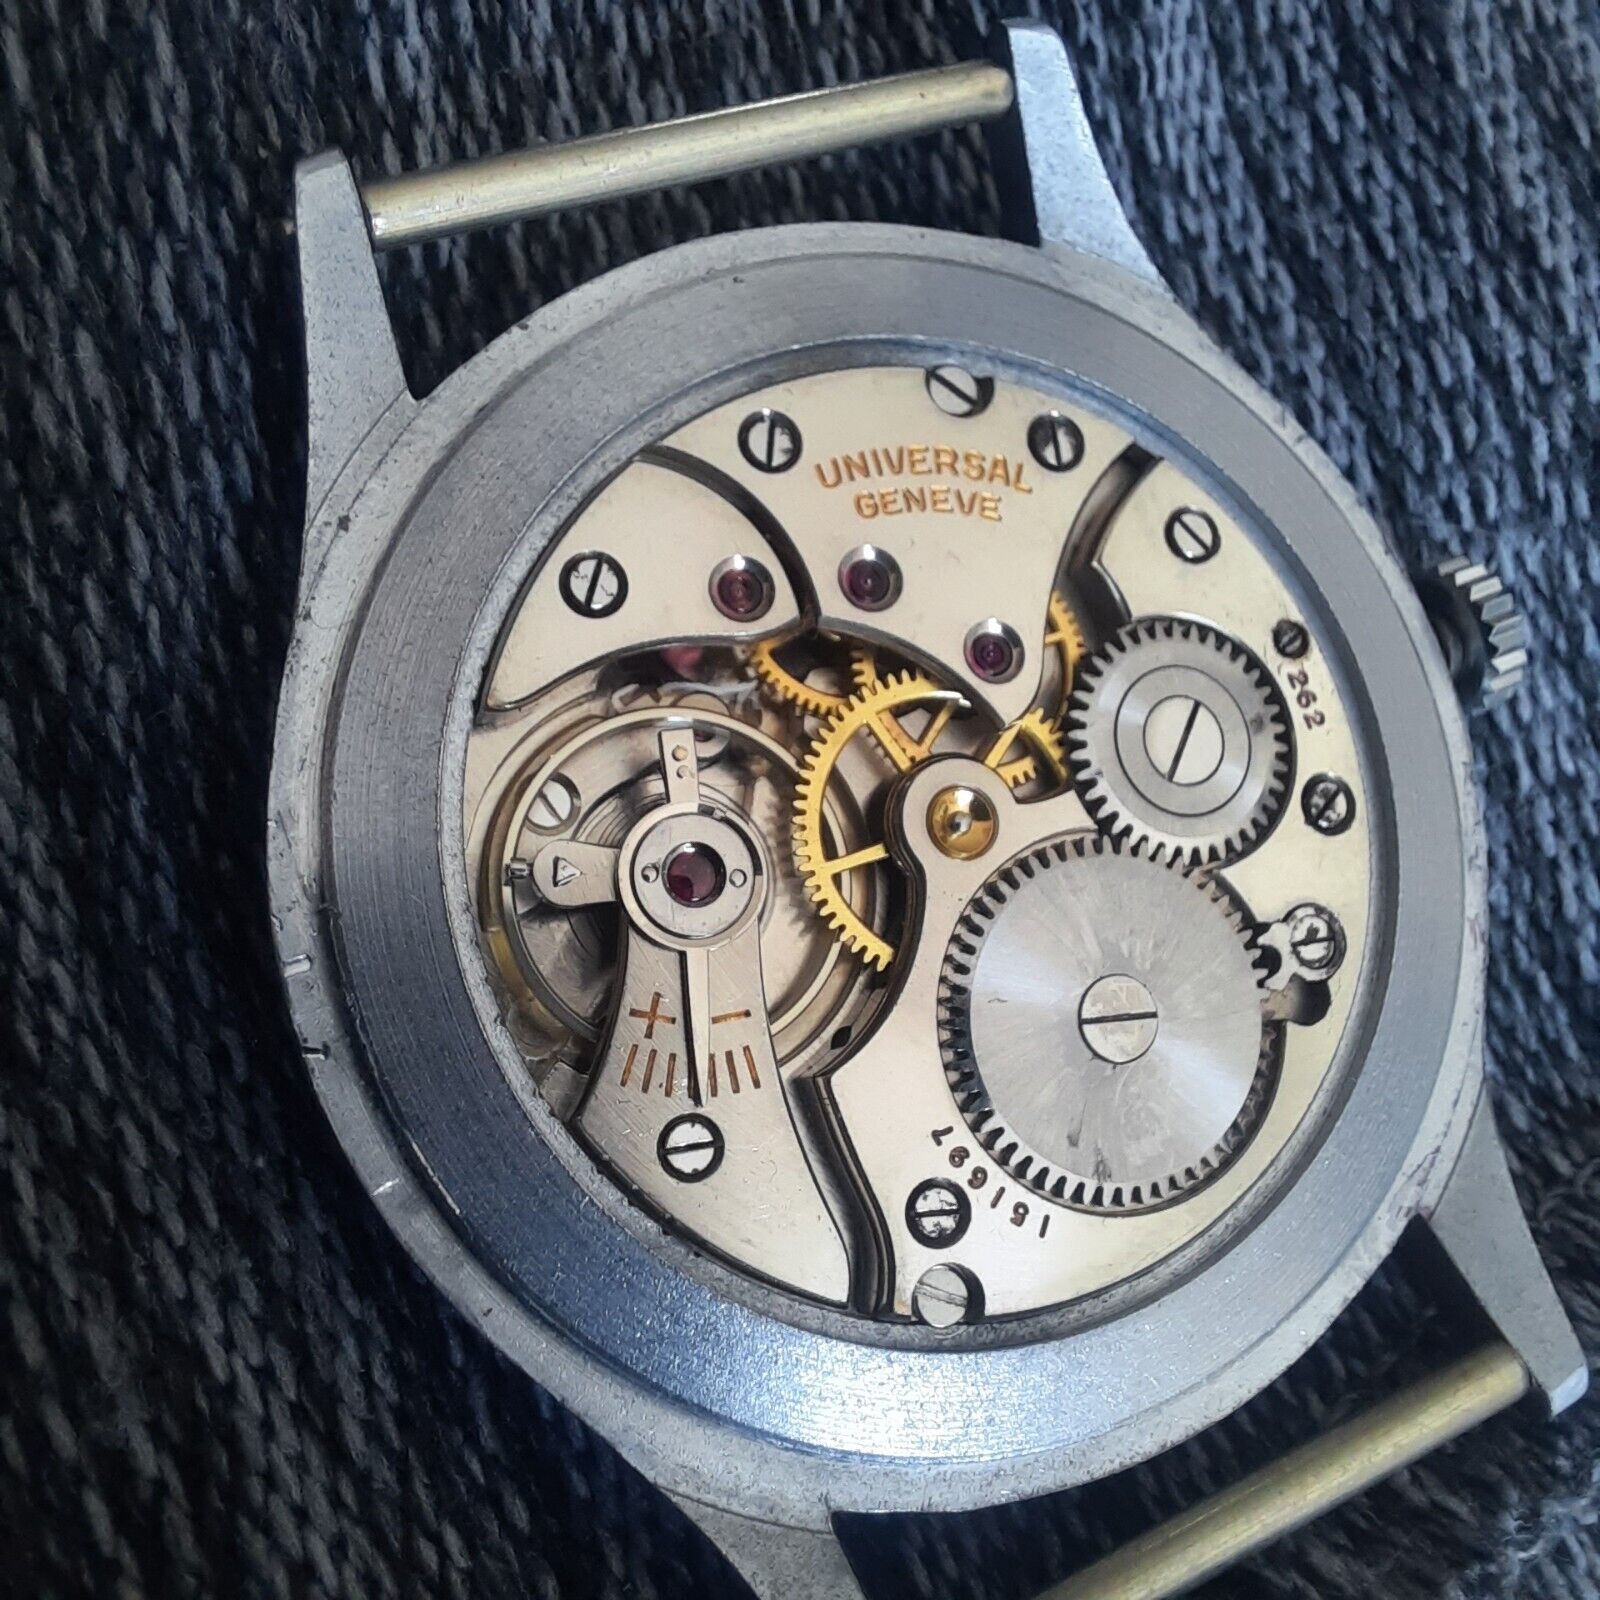 Universal Geneve Watches On Ebay | Page 323 | Omega Forums